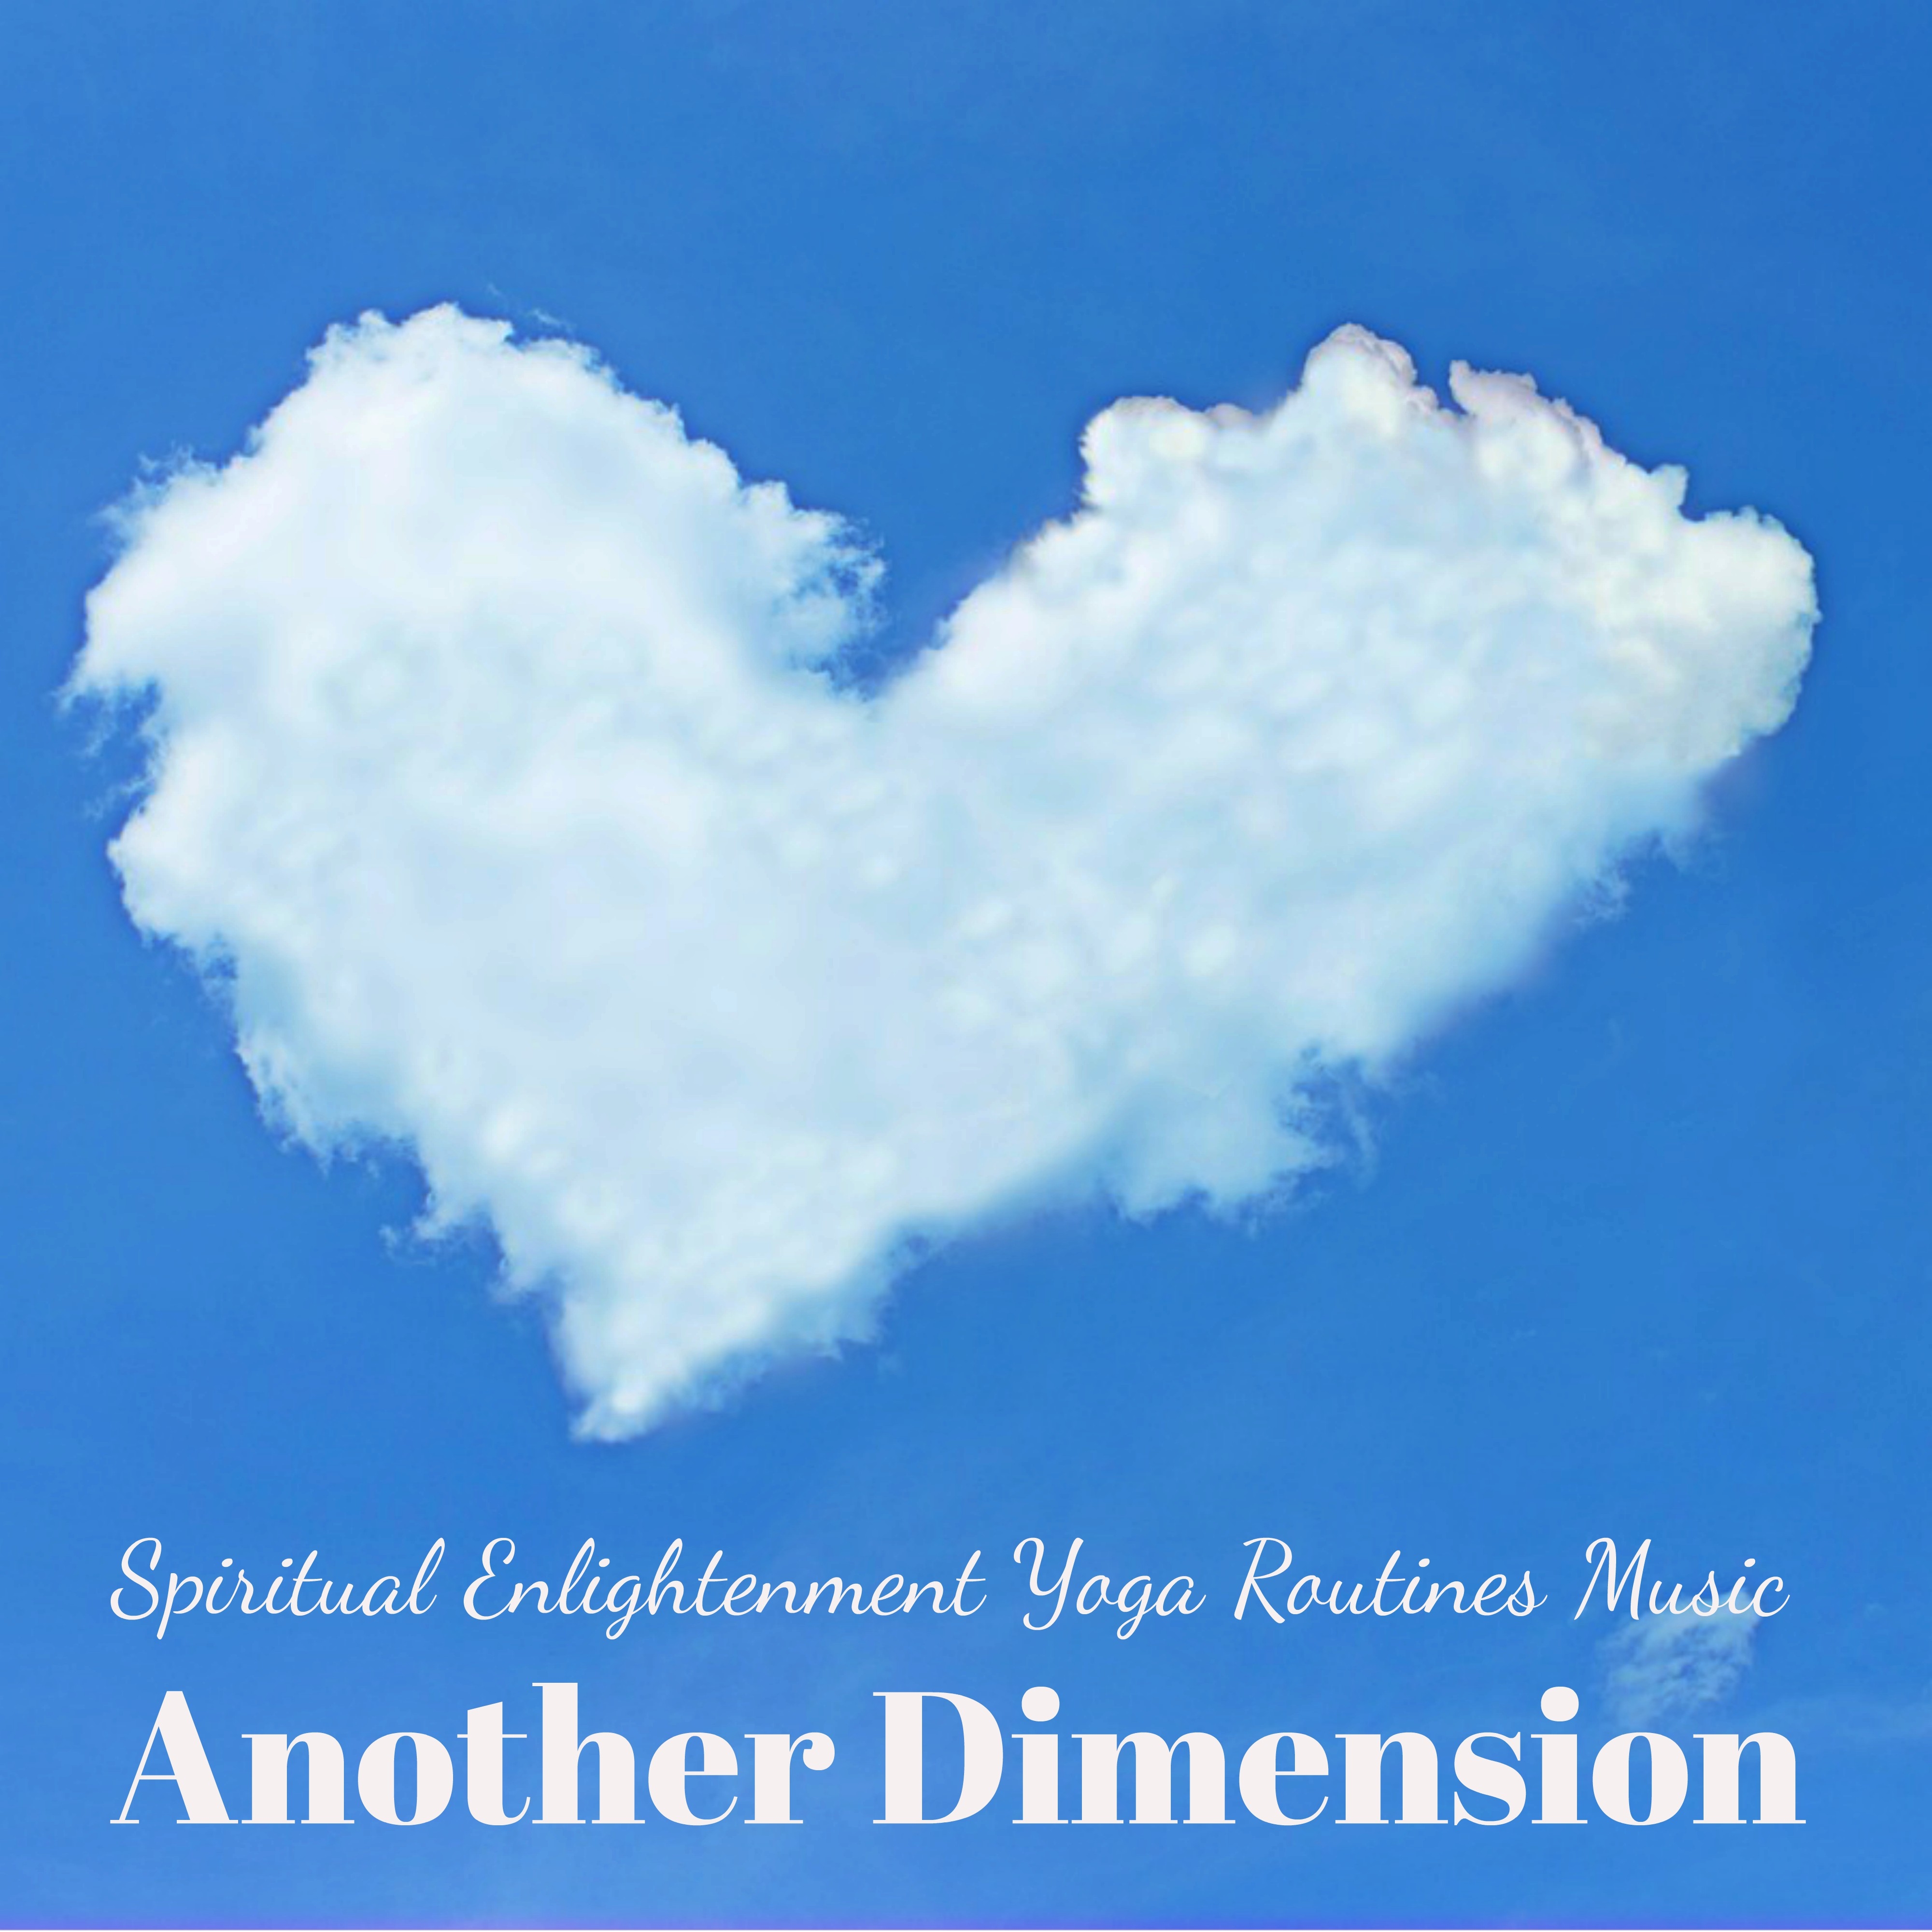 Another Dimension - Spiritual Enlightenment Yoga Routines Music to Improve Concentration Reduce Anxiety with Soothing Meditative Healing Sounds